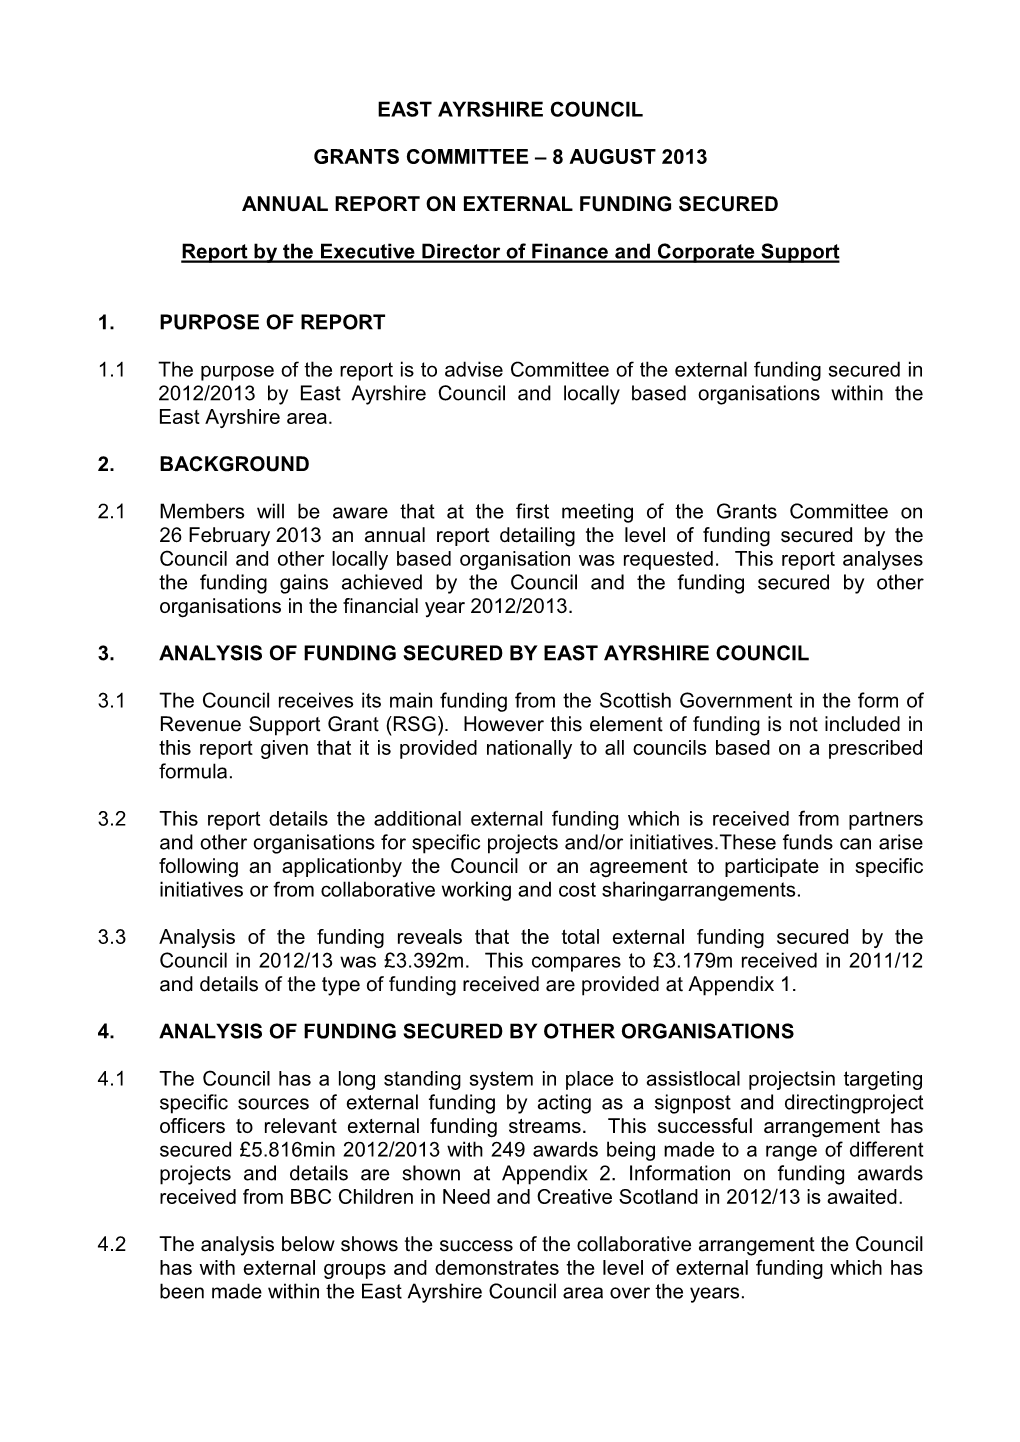 East Ayrshire Council Grants Committee